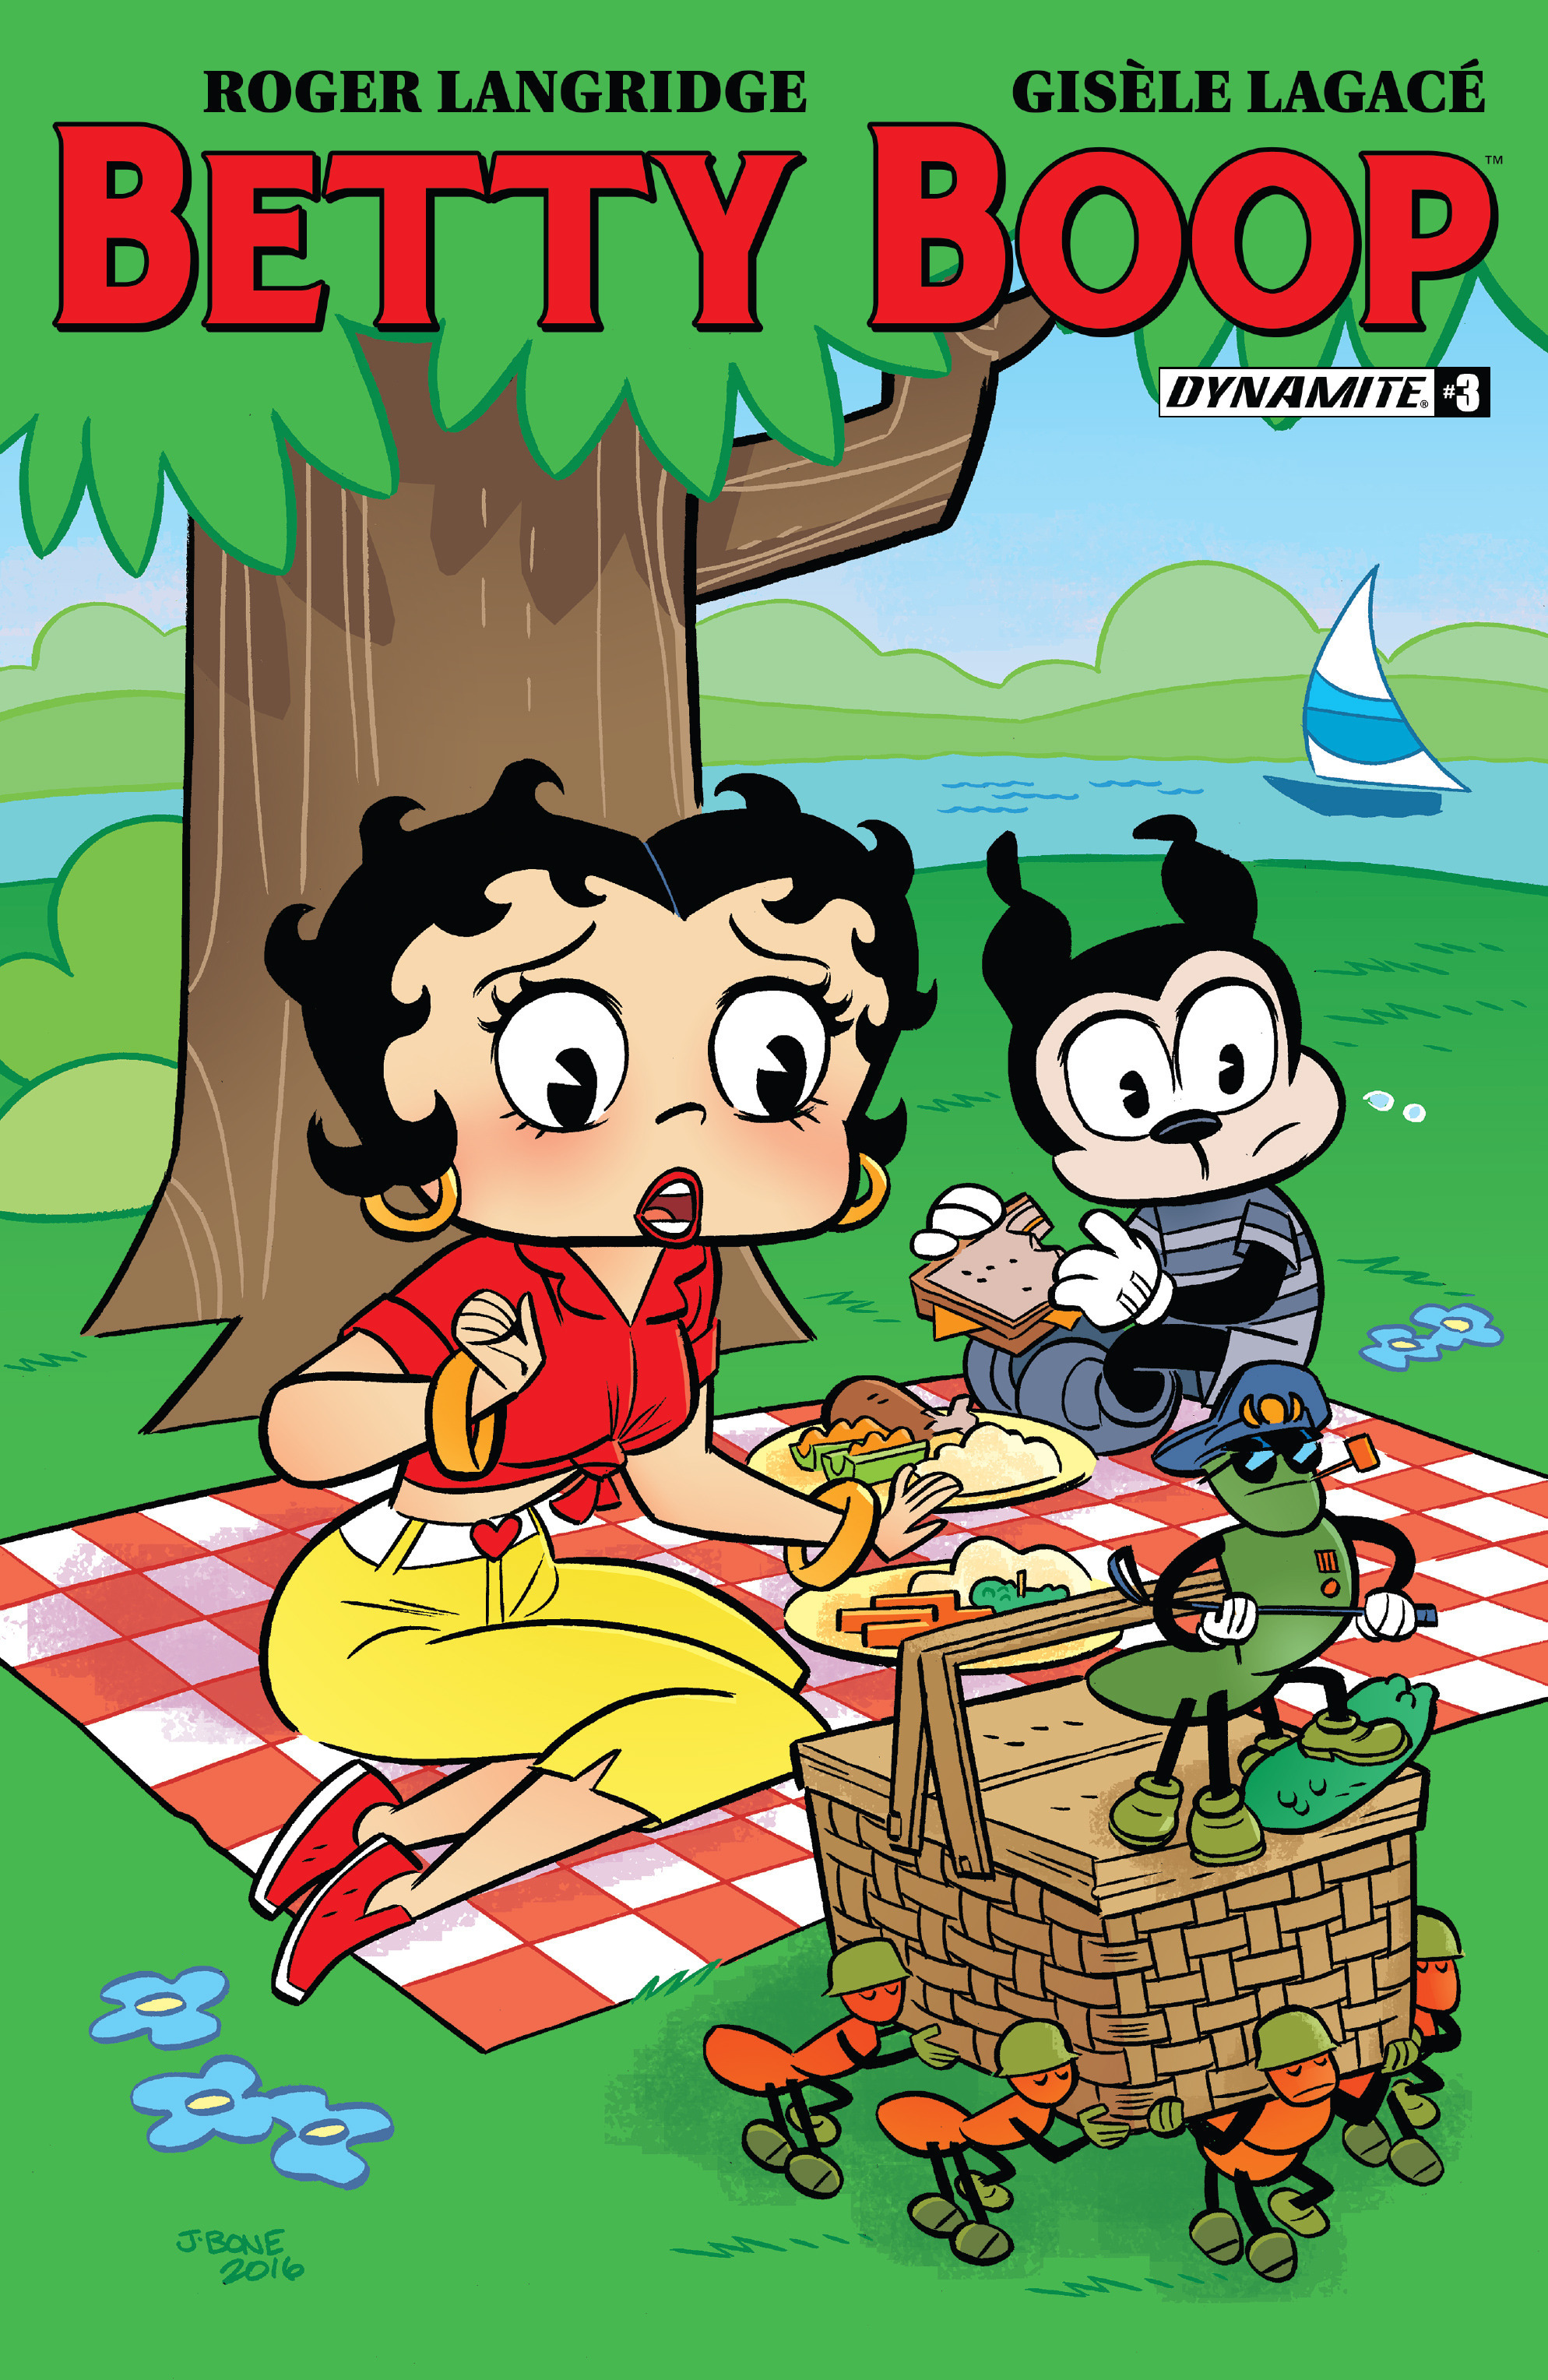 Read online Betty Boop comic -  Issue #3 - 2